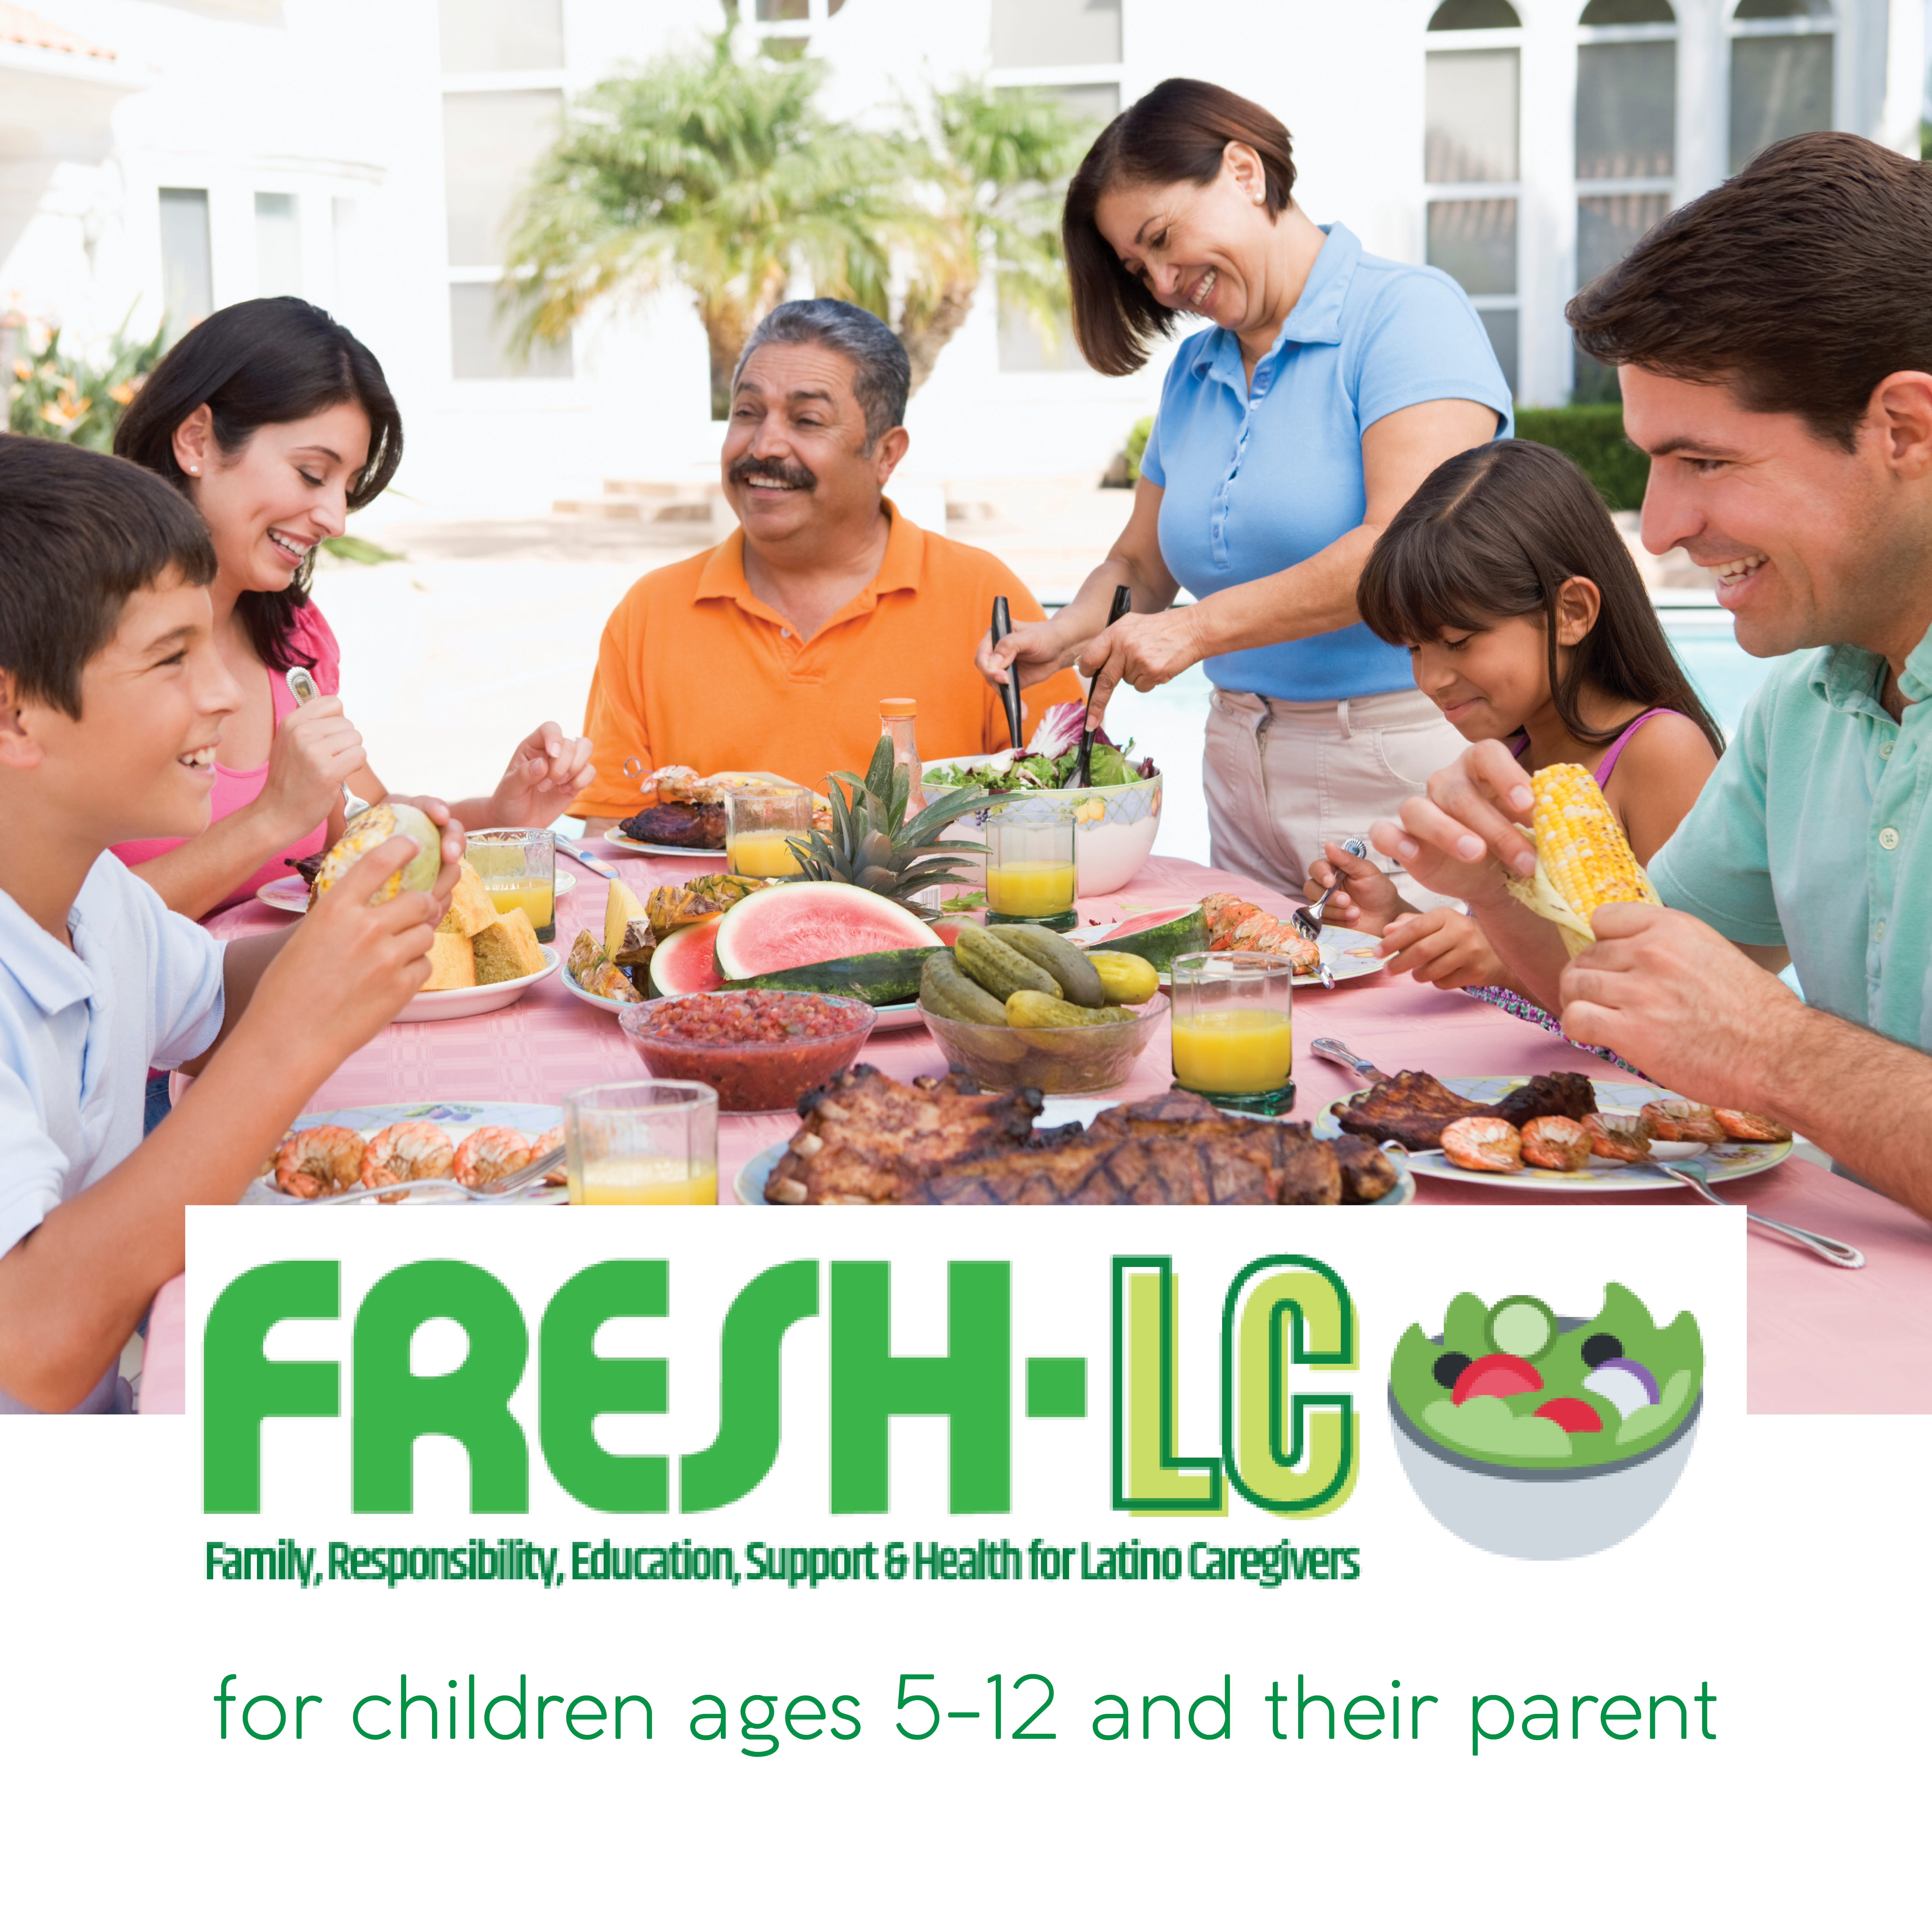 Family, Responsibility, Education, Support and Health for Latino Caregivers